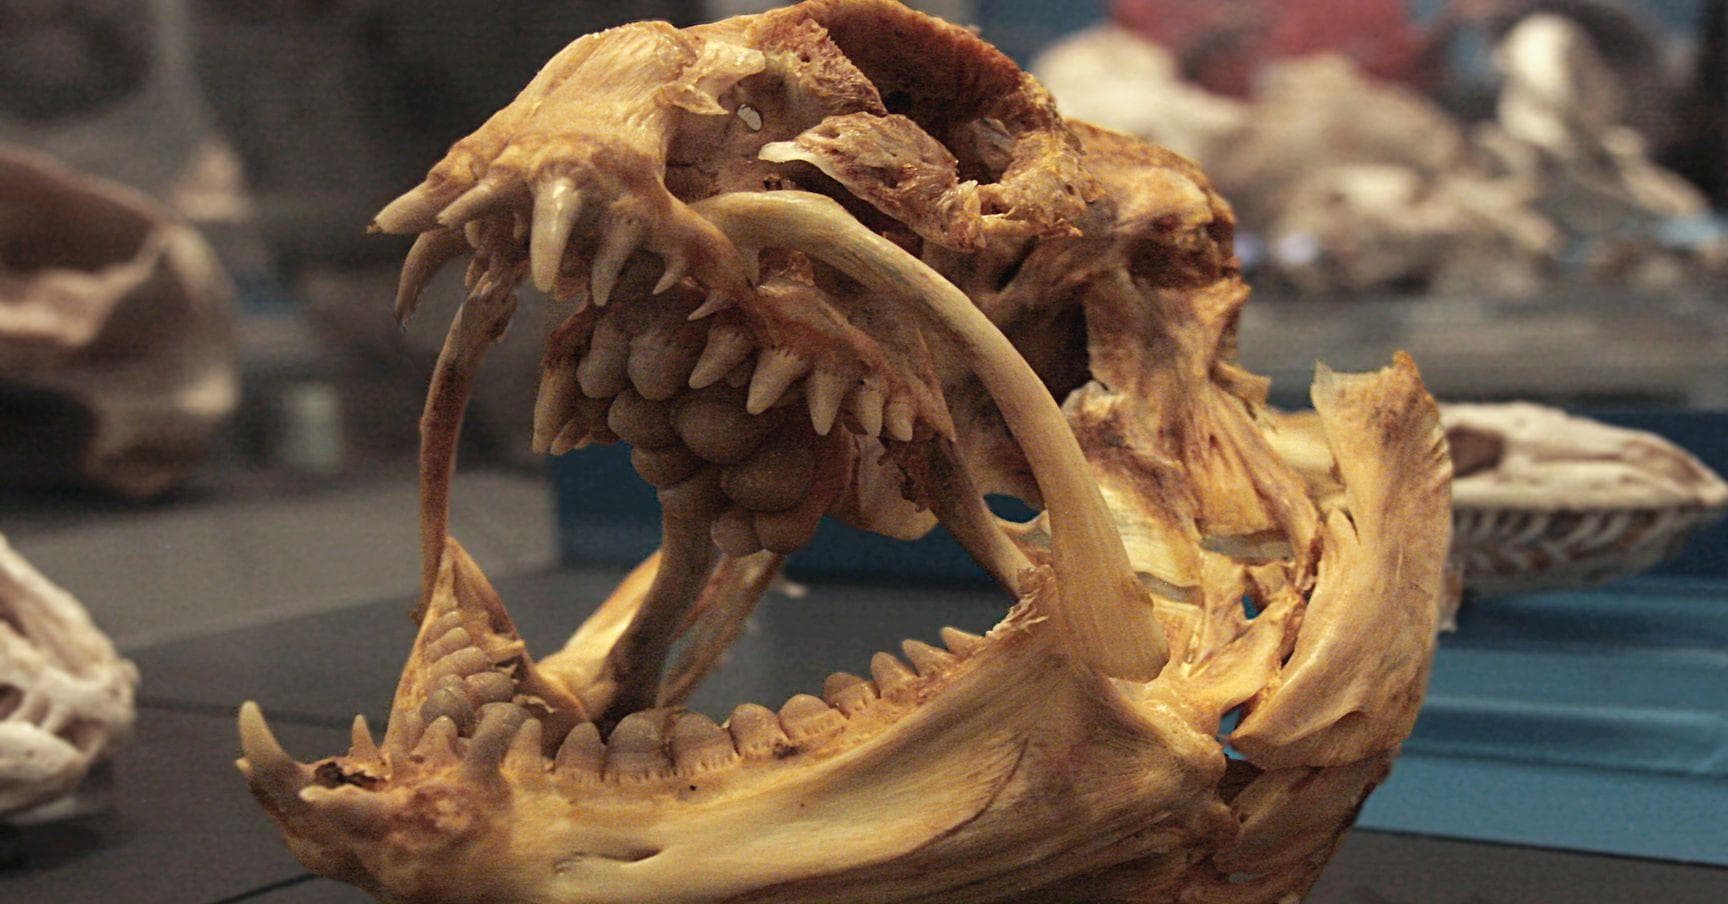 Wild-Looking Animal Skeletons That Made Us Say 'Whoa'